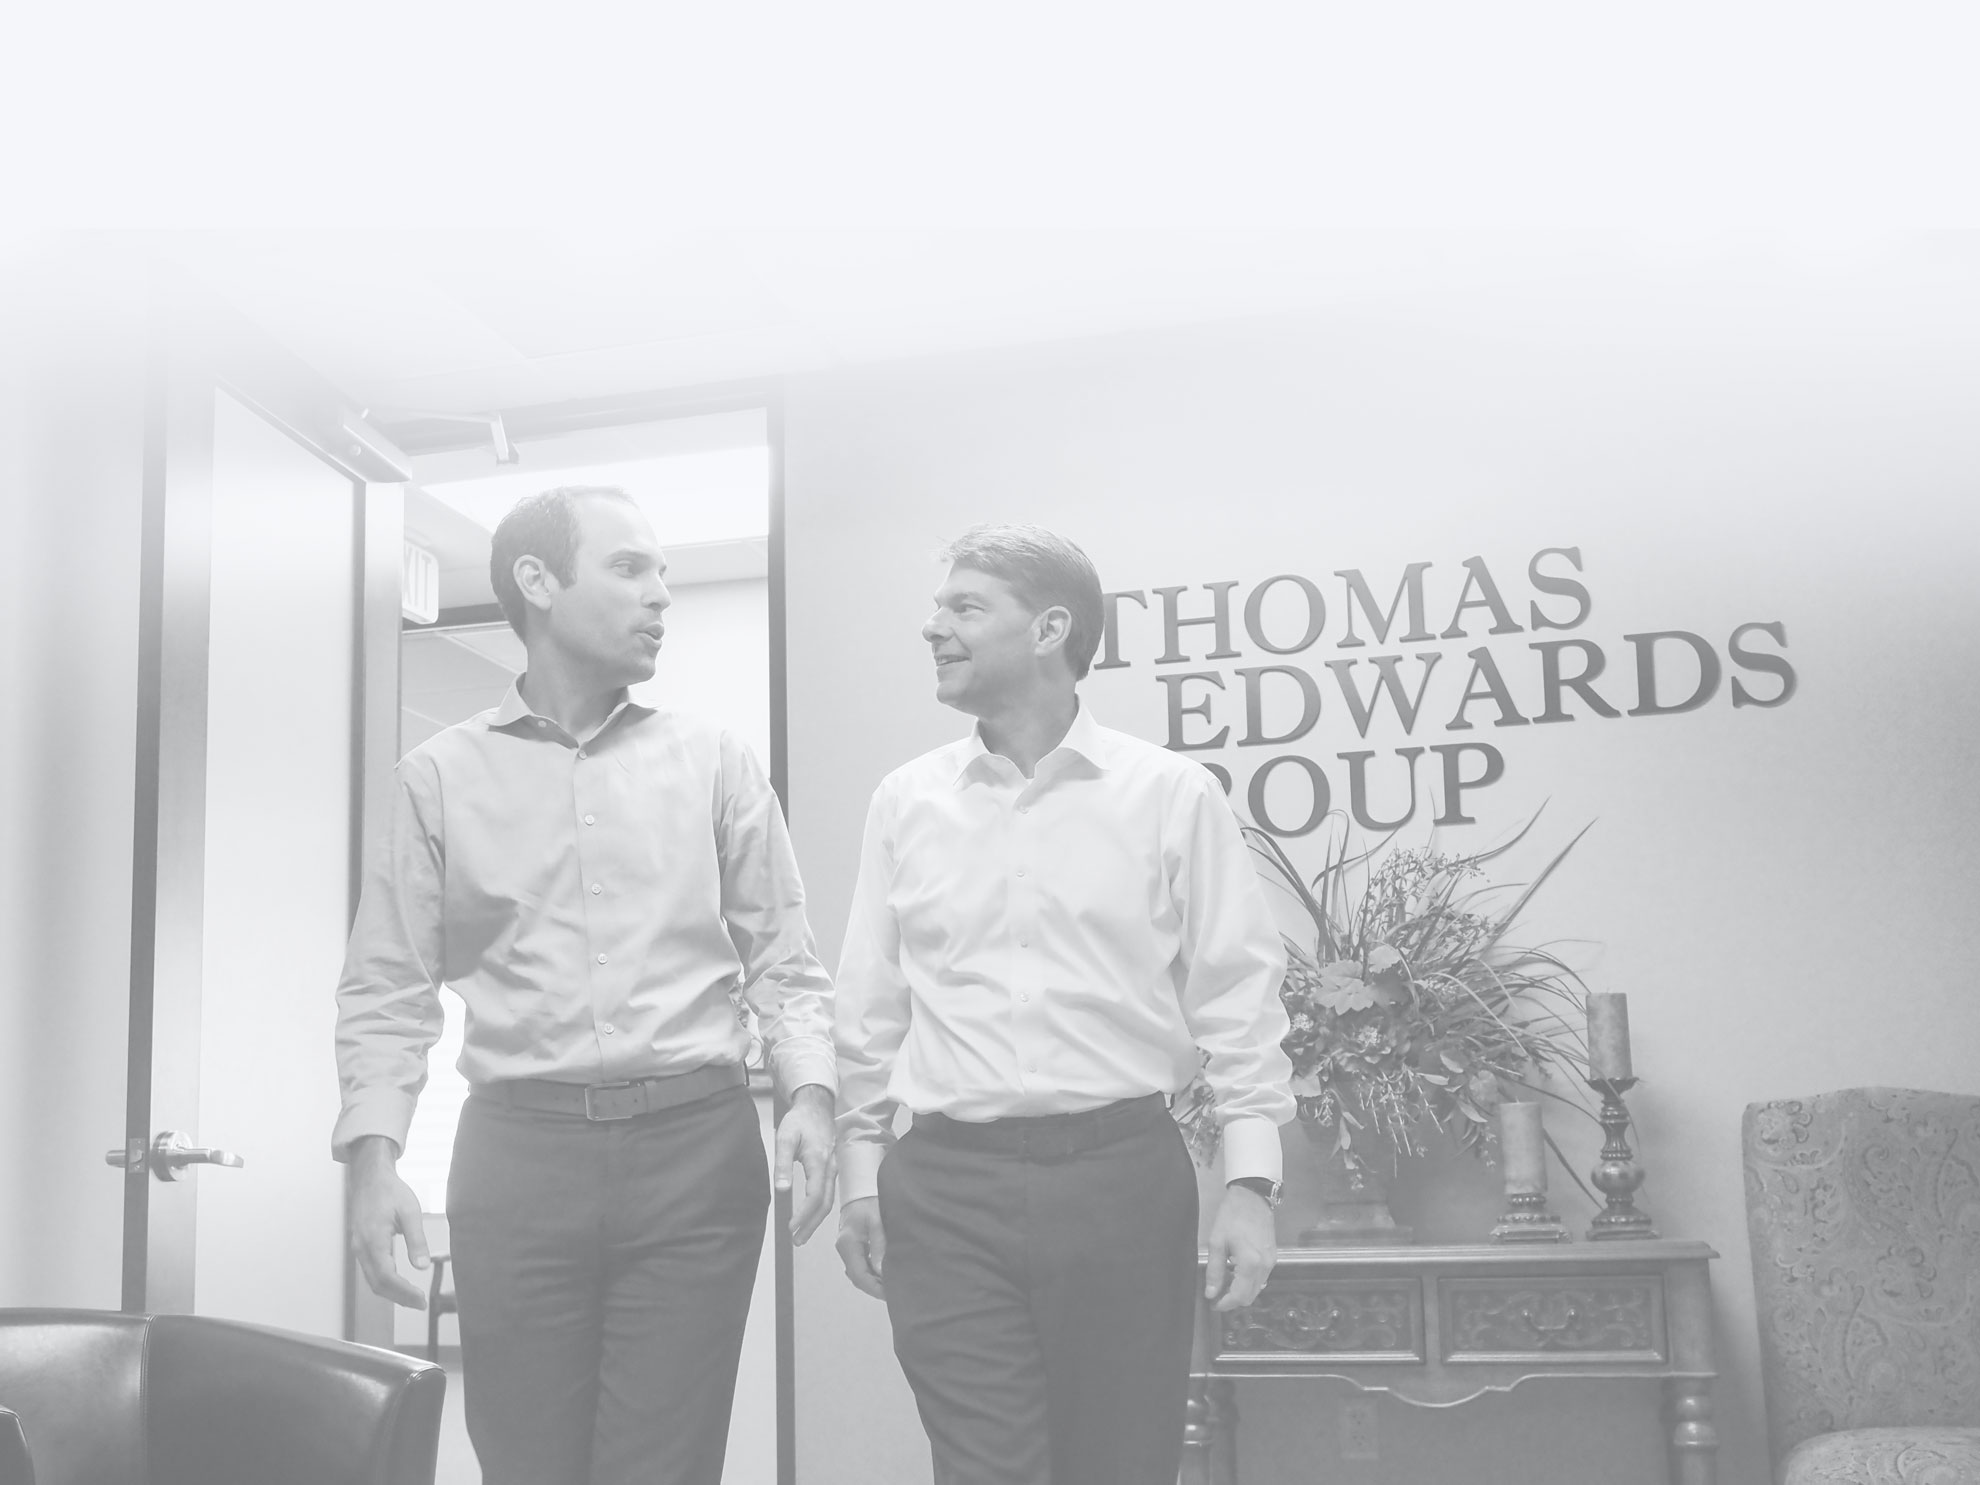 two professional men walking and talking in front of thomas edwards sign in office setting